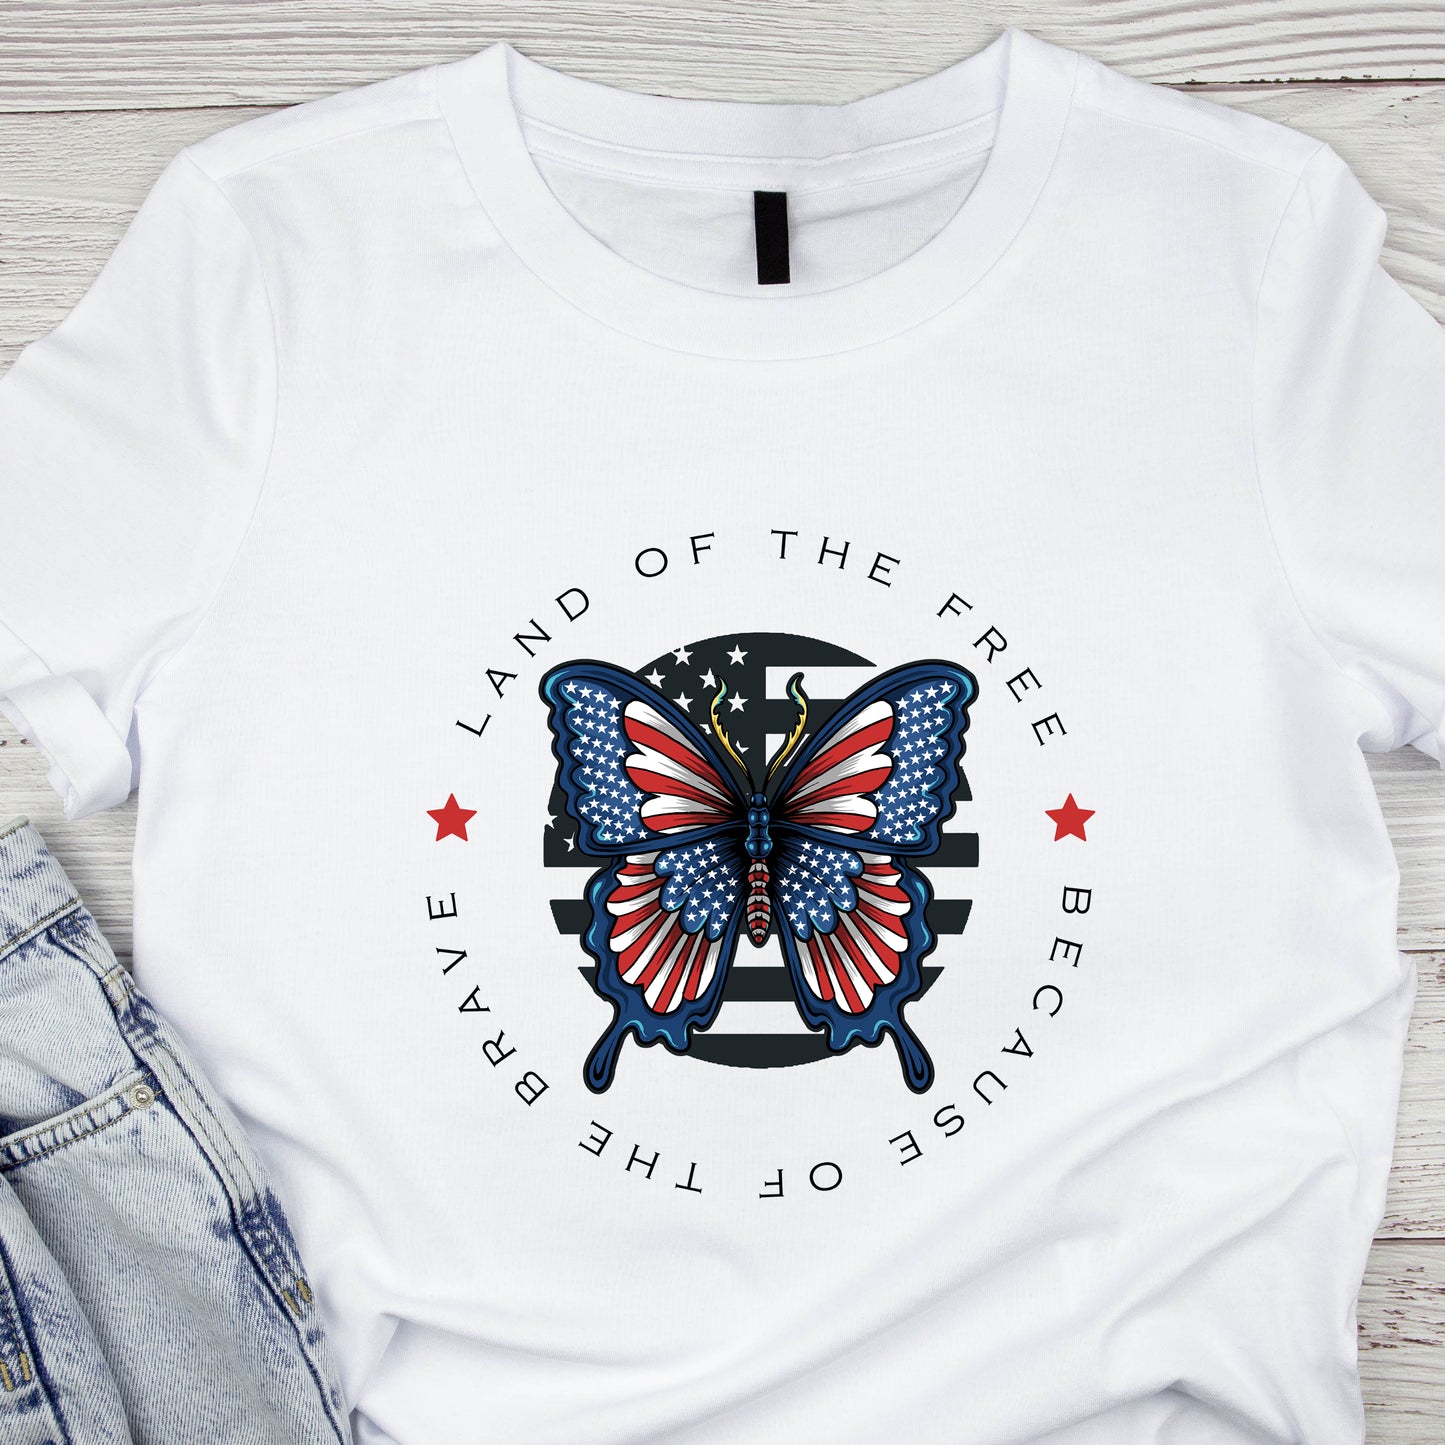 Patriotic T-Shirt For Conservative TShirt For 4th Of July T Shirt For Independence Day Shirt For Patriotic Gift Butterfly T-Shirt For Gift